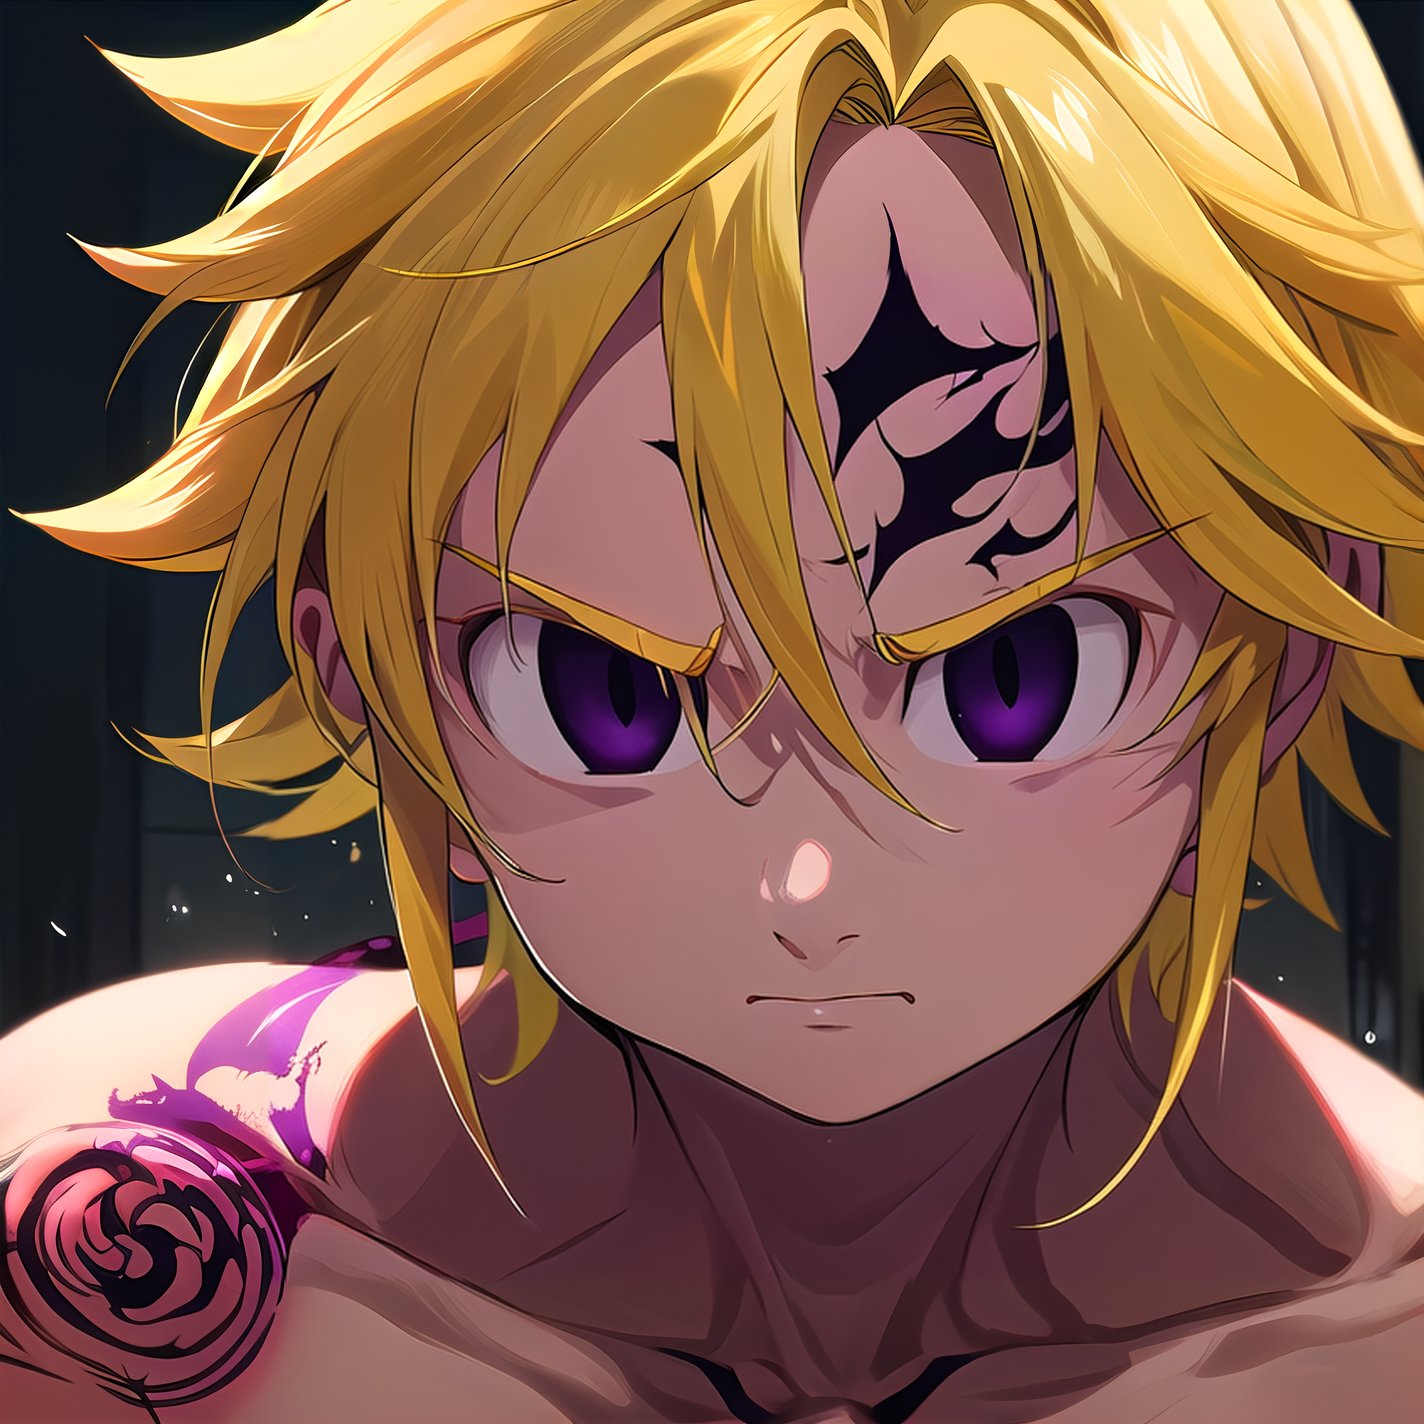 solo, male, depth of field, ((masterpiece, best quality)), demon, evil, The left part of the body is made of purple energy, purple aura, meliodas_nanatsu_no_taizai,blonde hair, empty eyes, fantasy world in background, meliodas in demon form, Blood coming from his mouth, Purple tattoo on his forehead, black eyes, dead eyes, Cold feelings 